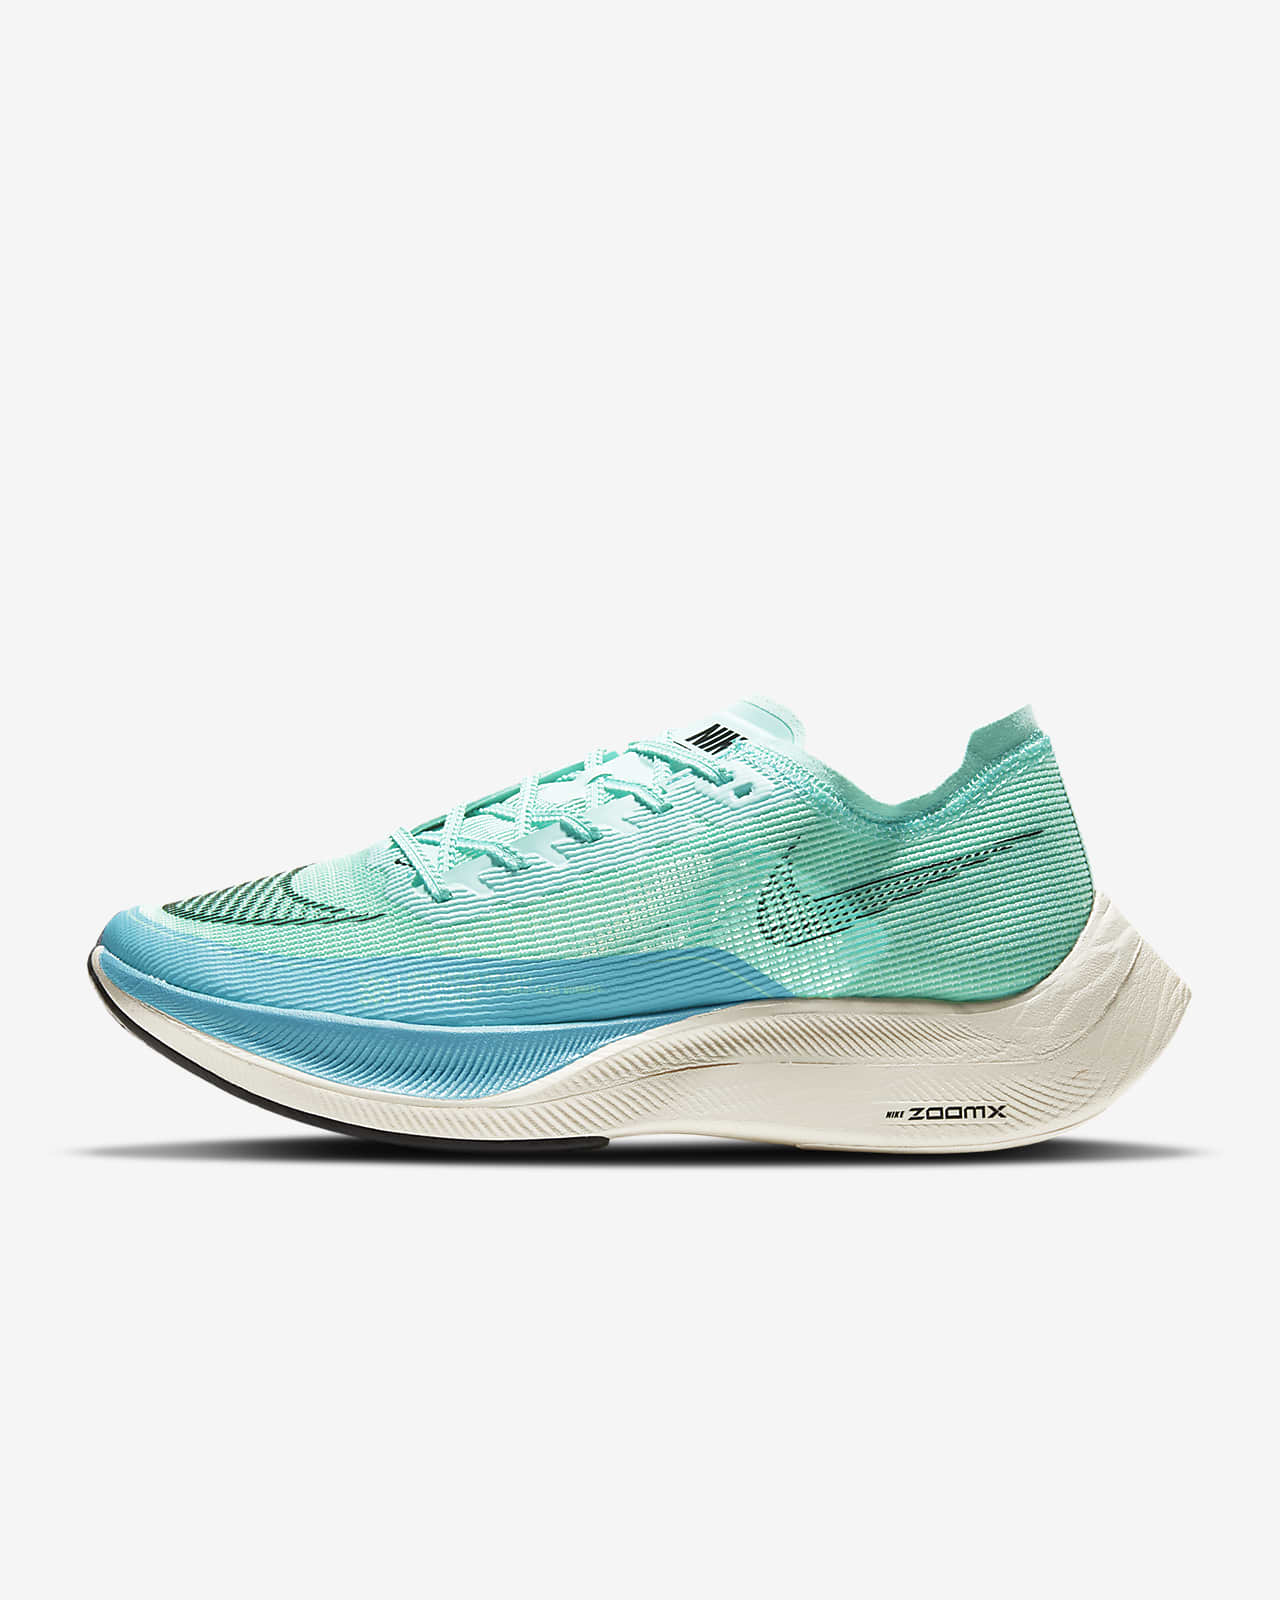 new nike shoes vaporfly